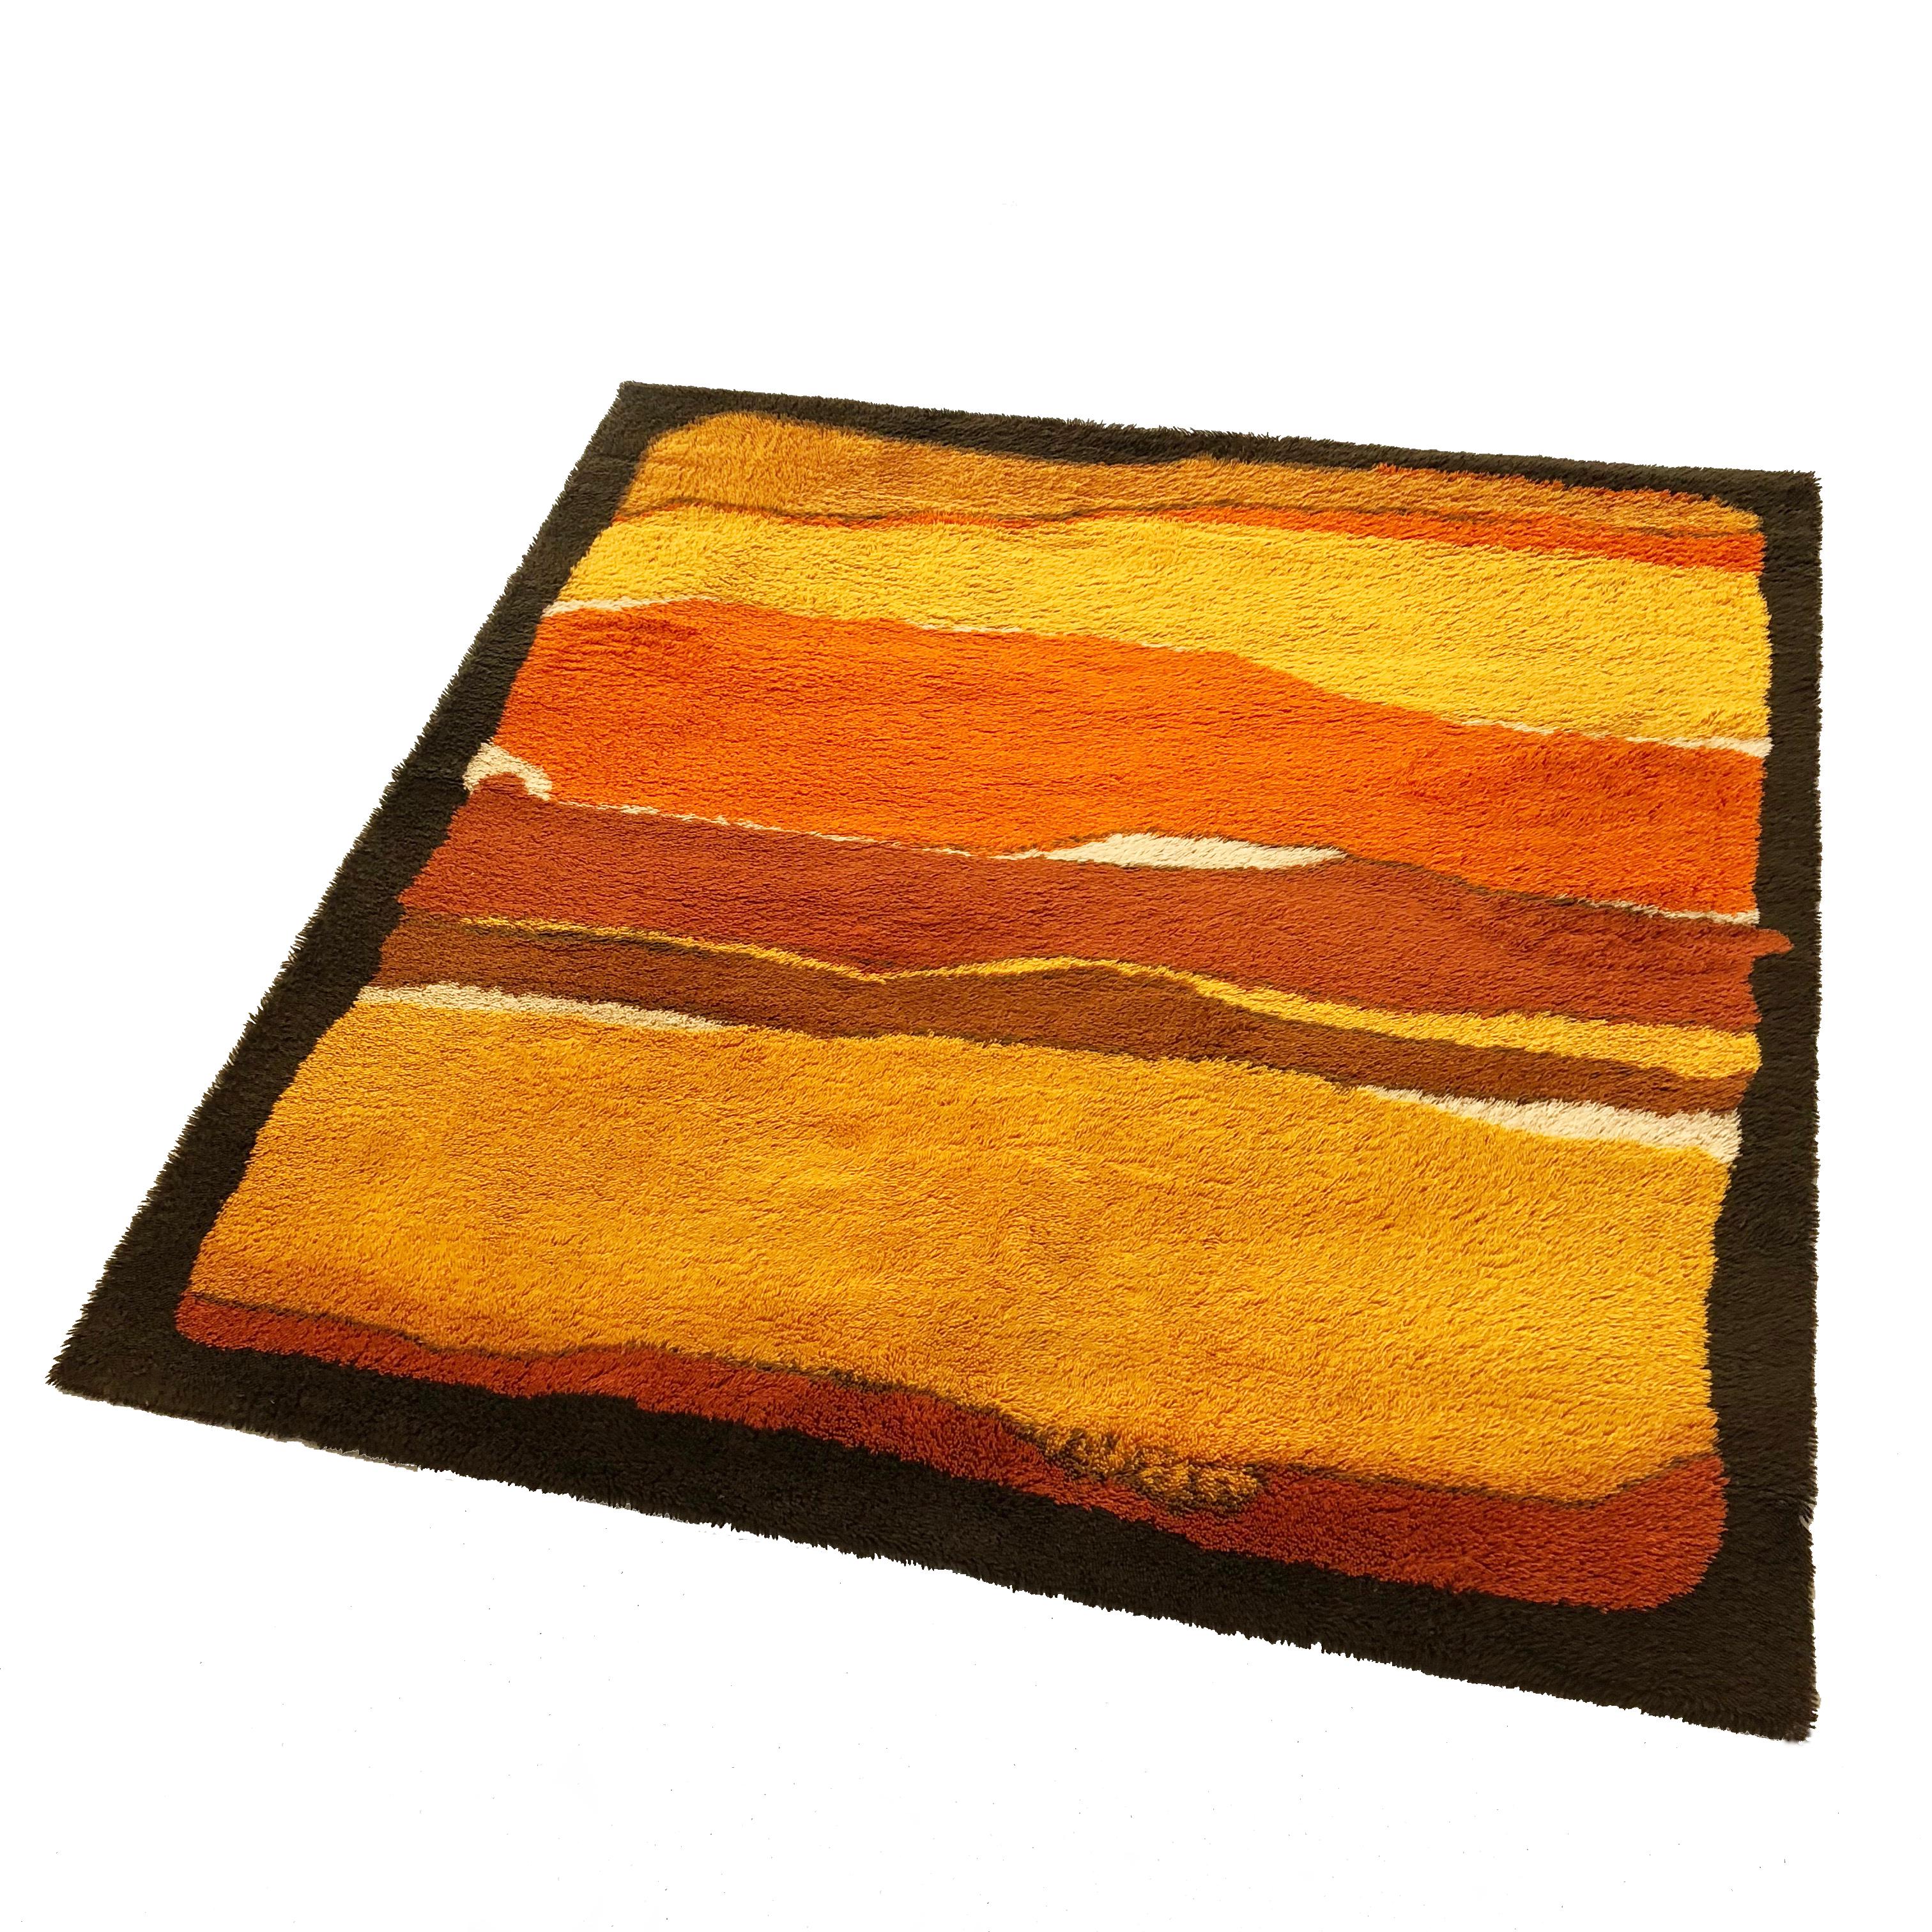 Mid-Century Modern Extra Large Pop Art Vintage 1970s Multi-Color High Pile Cotton Rya Rug by Besmer